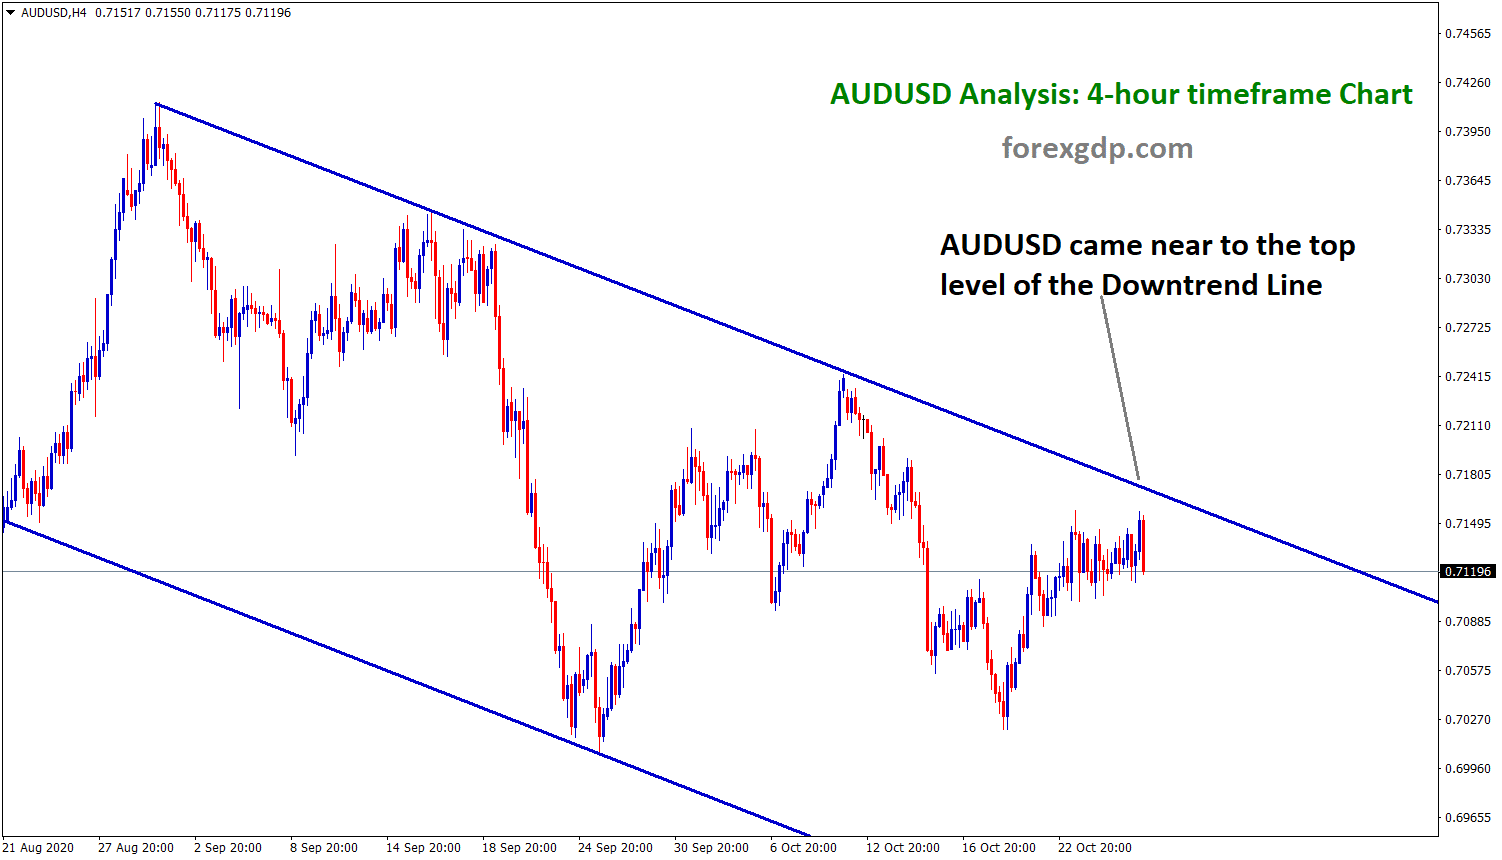 audusd came near to the top of the down trend line